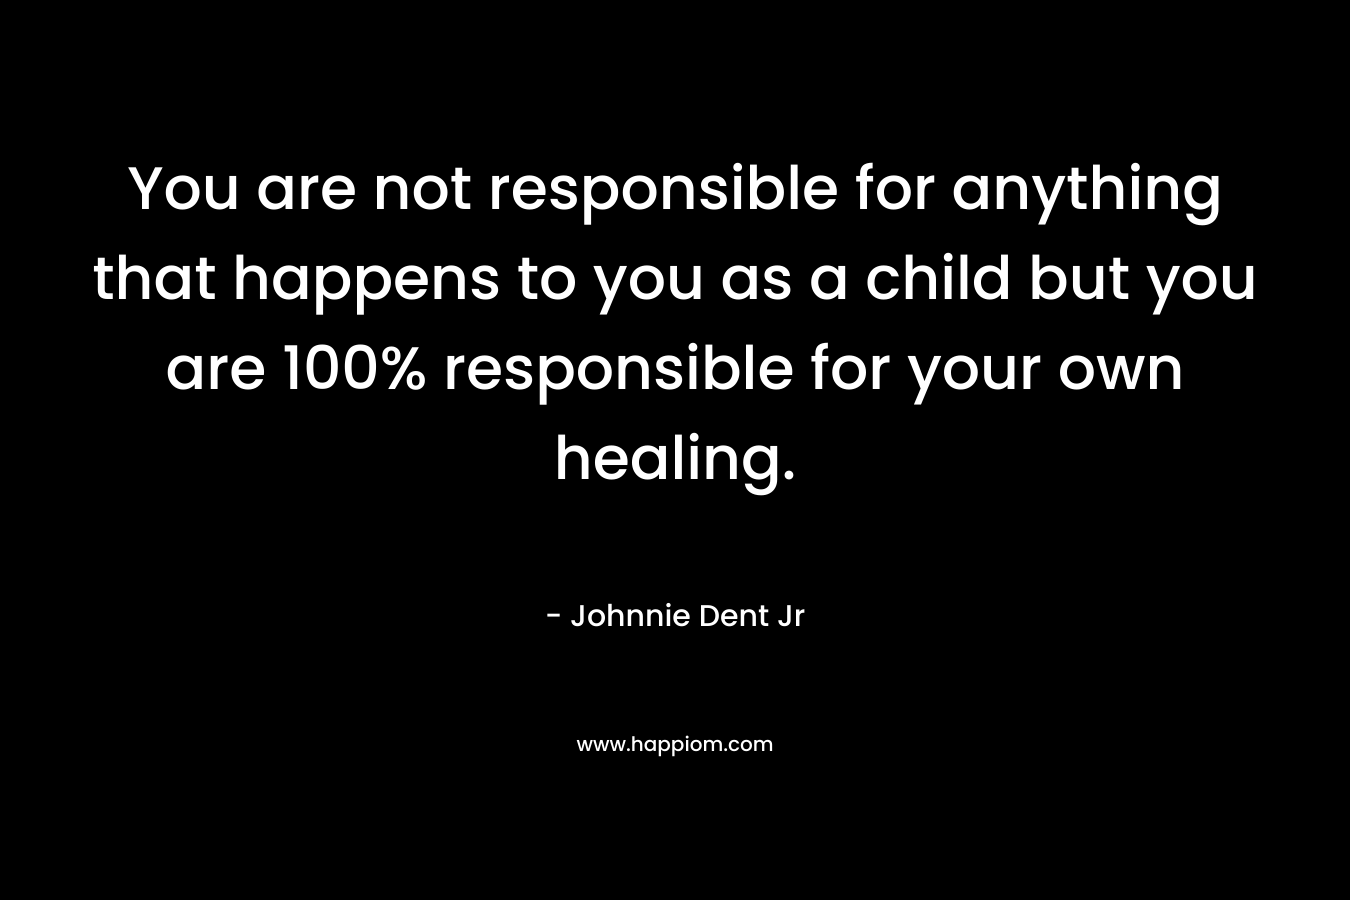 You are not responsible for anything that happens to you as a child but you are 100% responsible for your own healing.